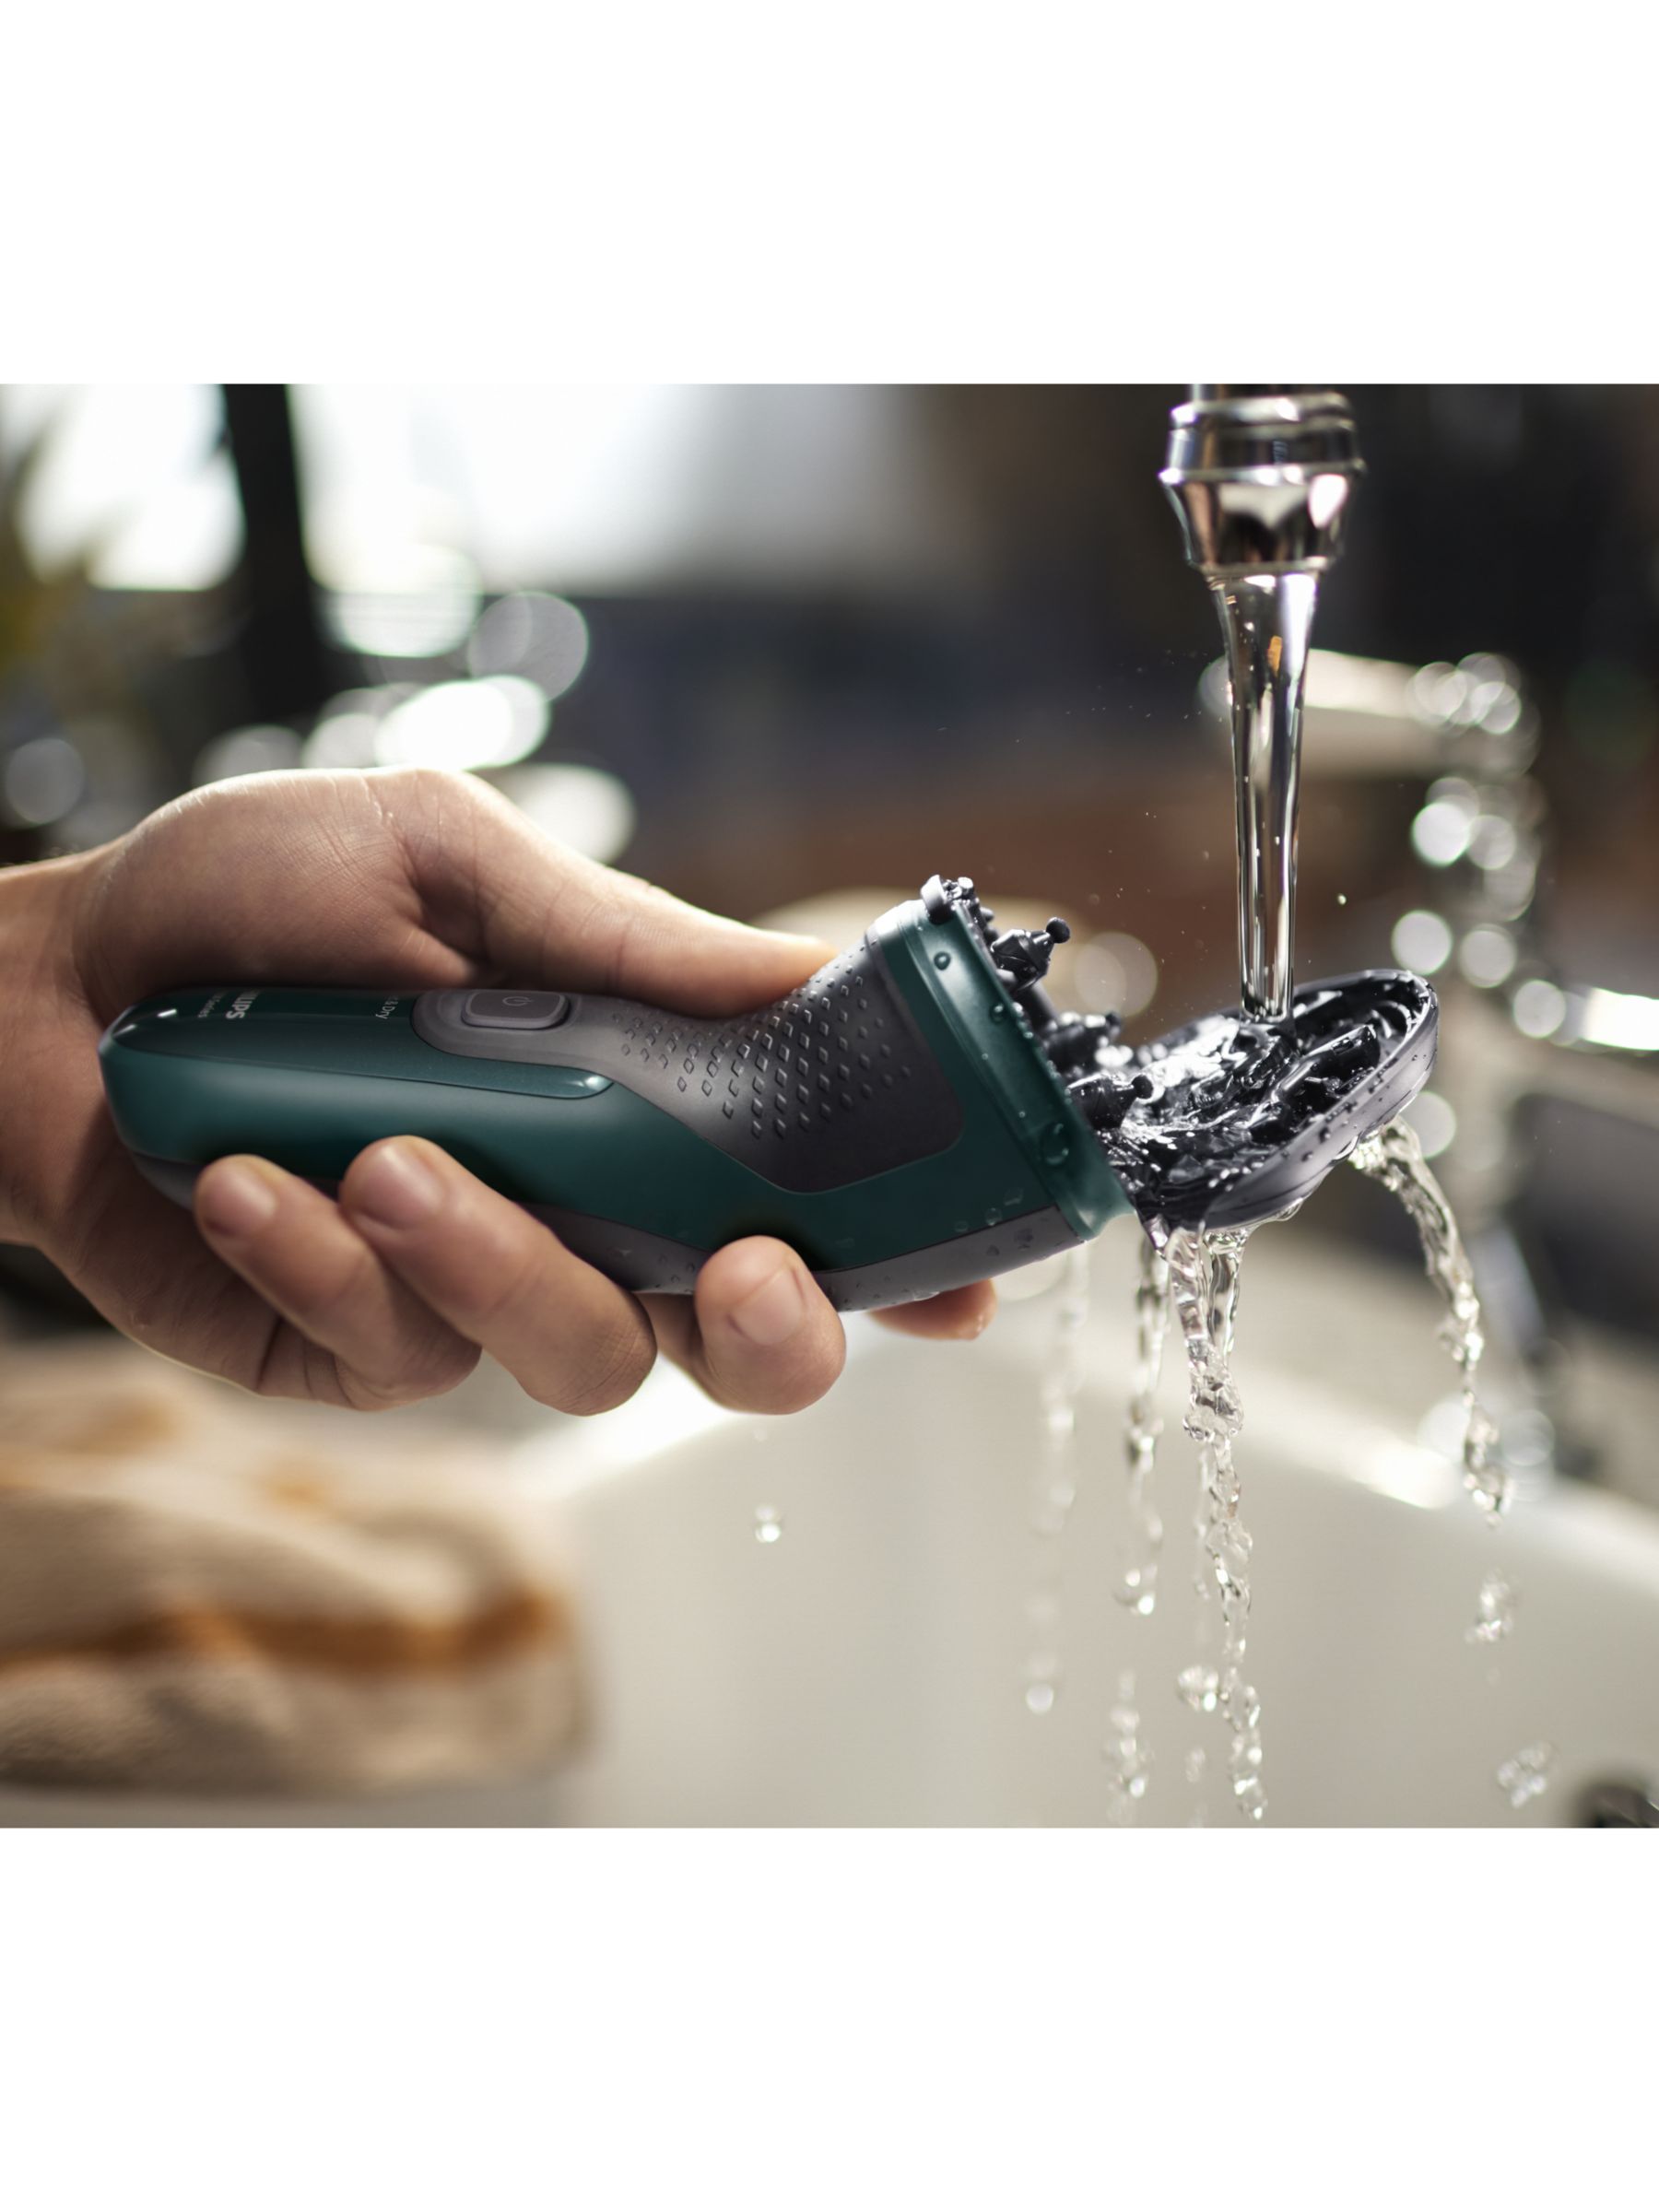 Philips Series 3000X X3052/00 Wet & Dry Electric Shaver with 27 PowerCut Blades, 4D Flex Heads & Pop-up Trimmer, Dark Green Forest